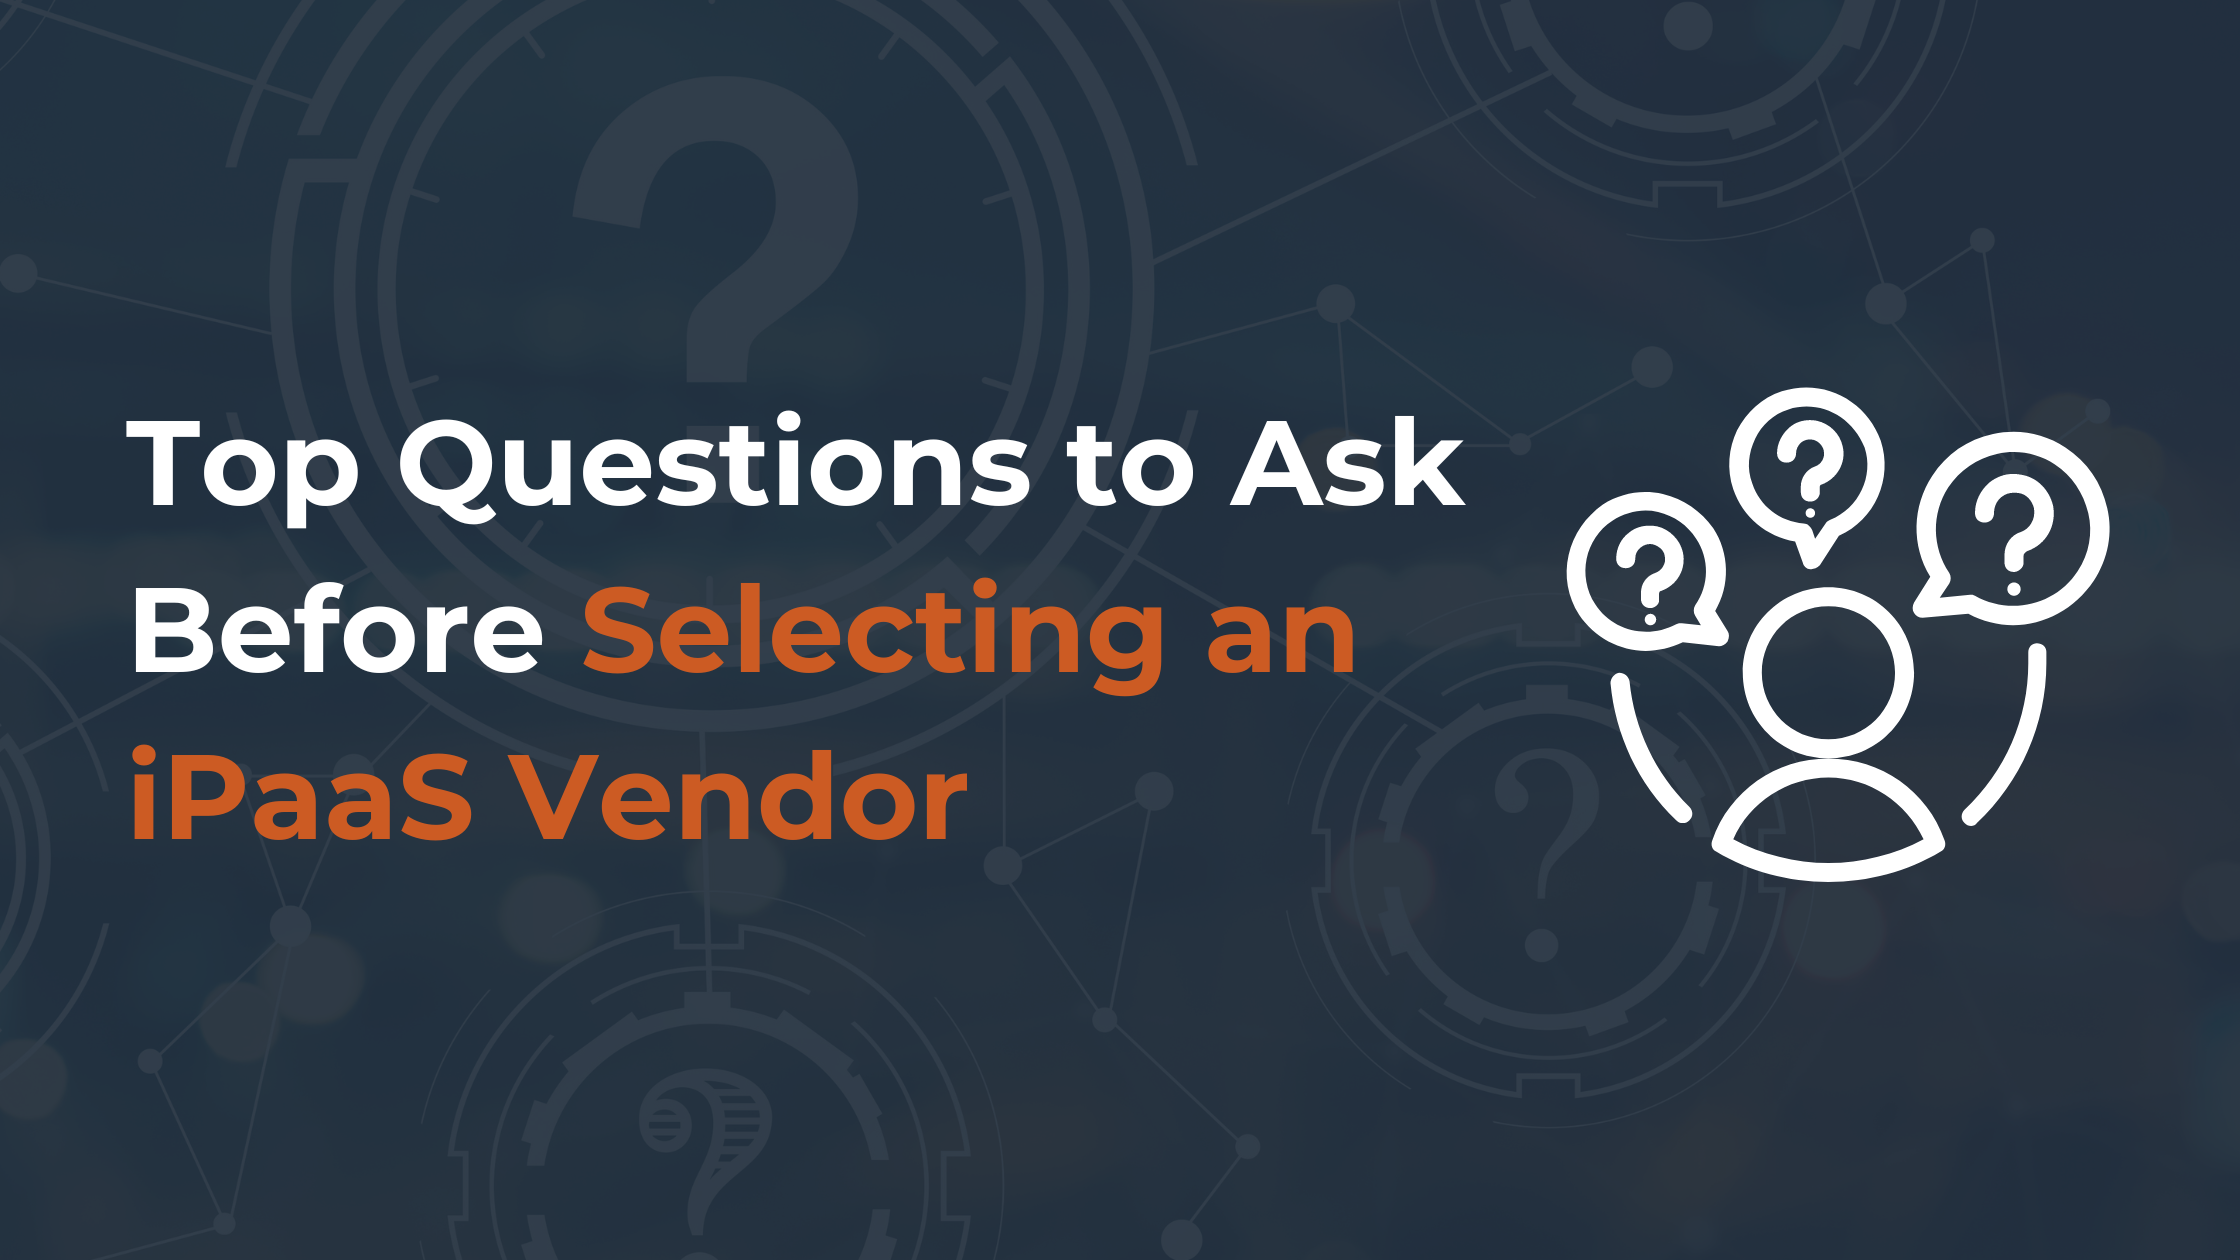 Top Questions to Ask Before Selecting an iPaaS Vendor